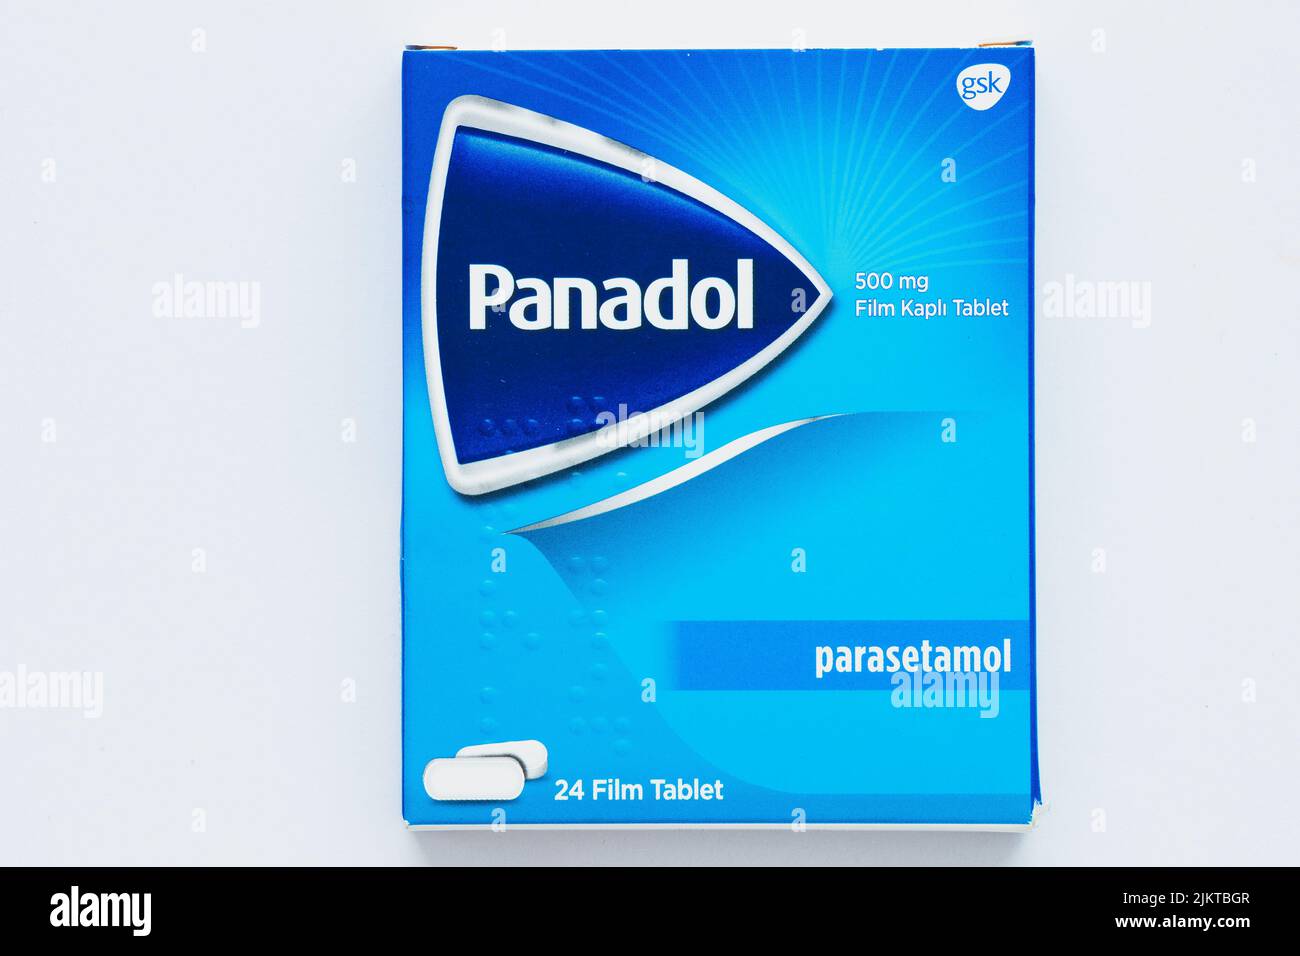 10 June 2022, Antalya, Turkey: Panadol medication pack - it is a popular pain killer and fever treatment pill Stock Photo